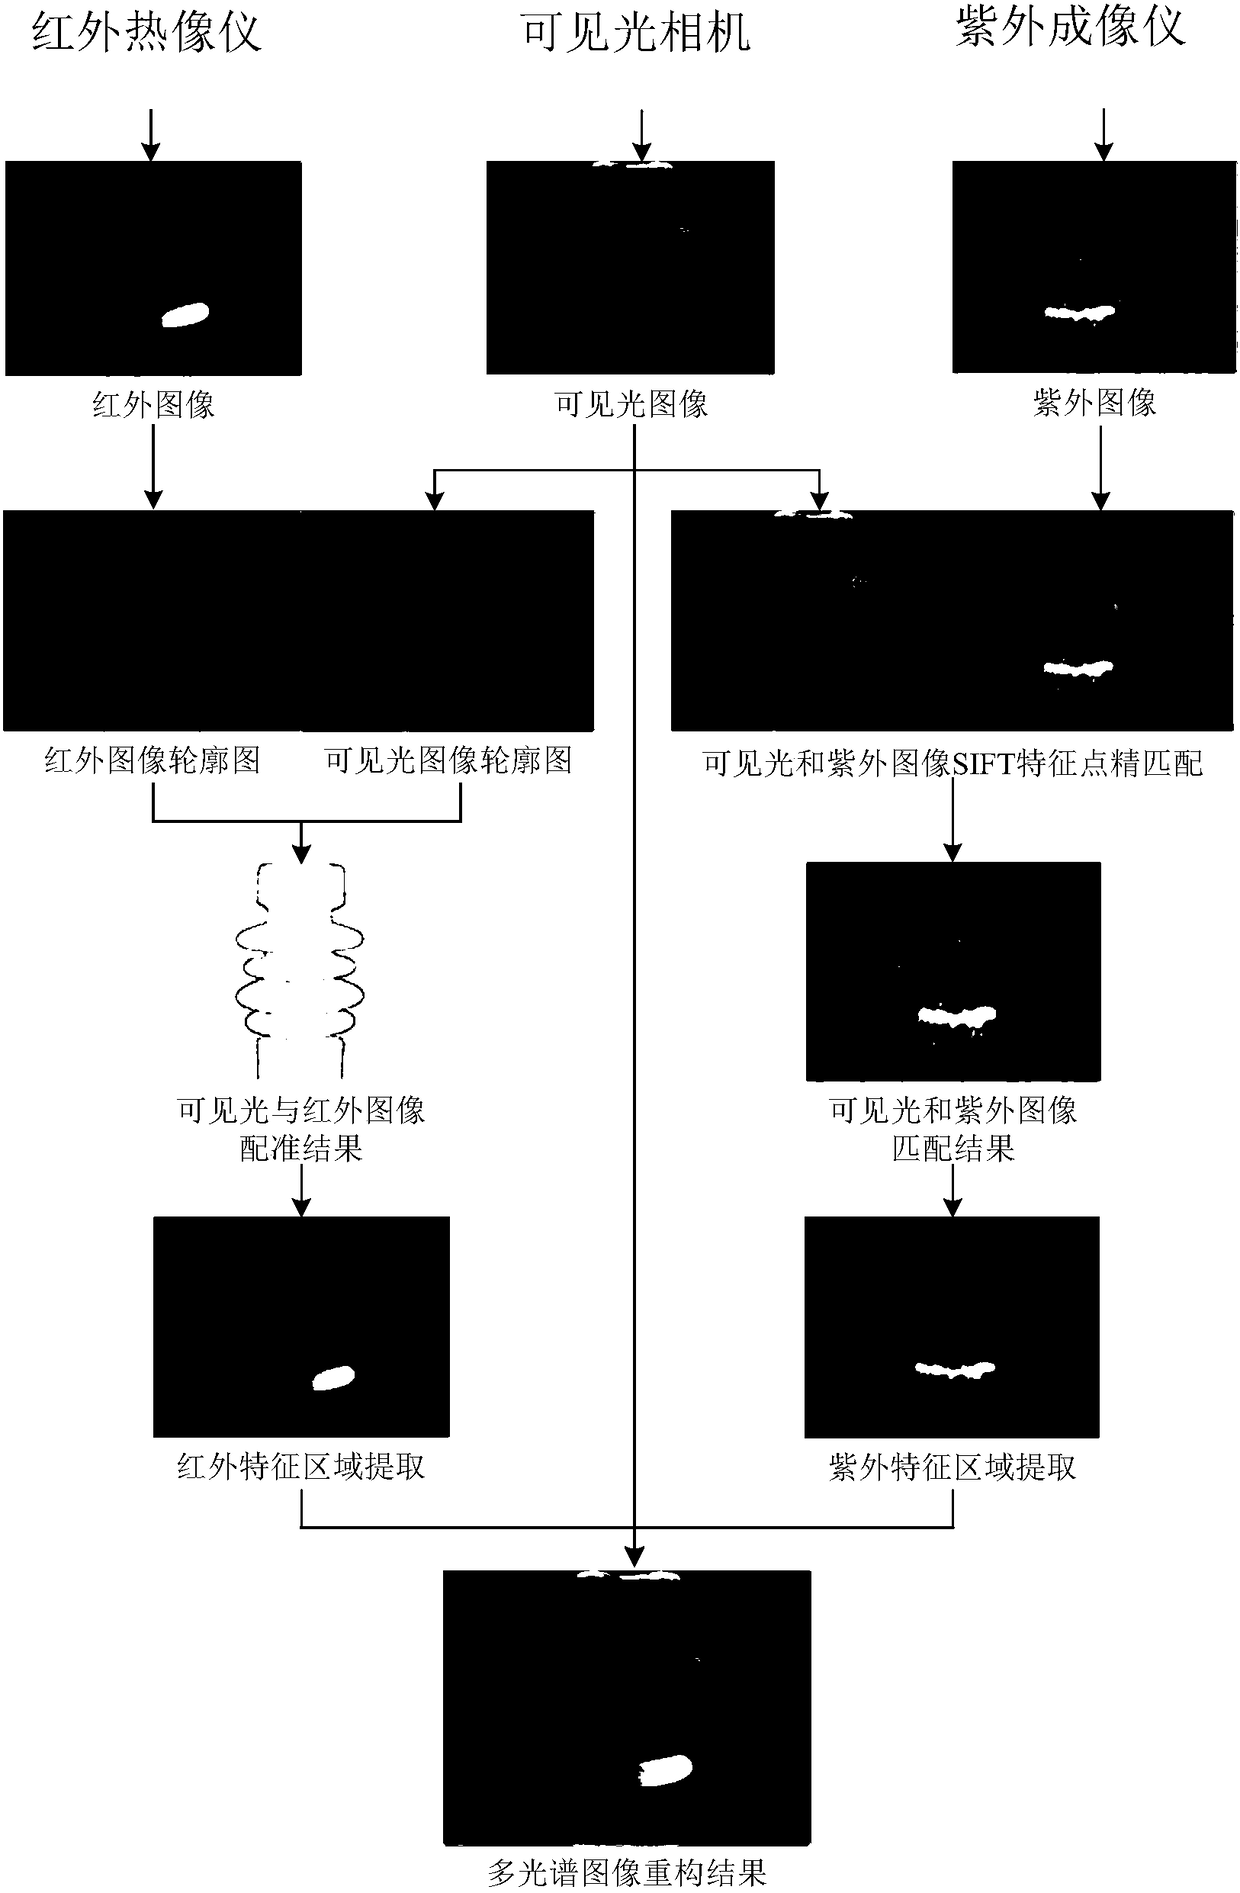 Multispectral image reconstruction method for online detection of electric equipment